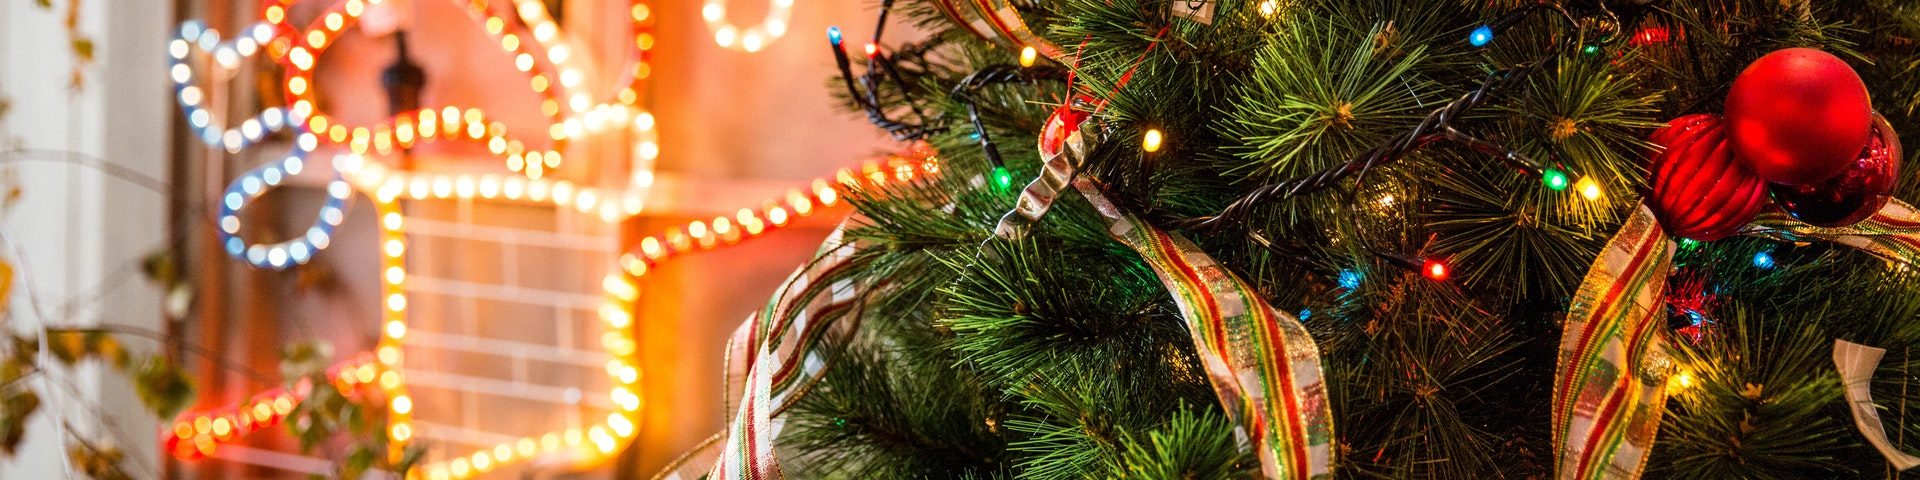 5 Reasons to Purchase Christmas Decorations in the Off-Season